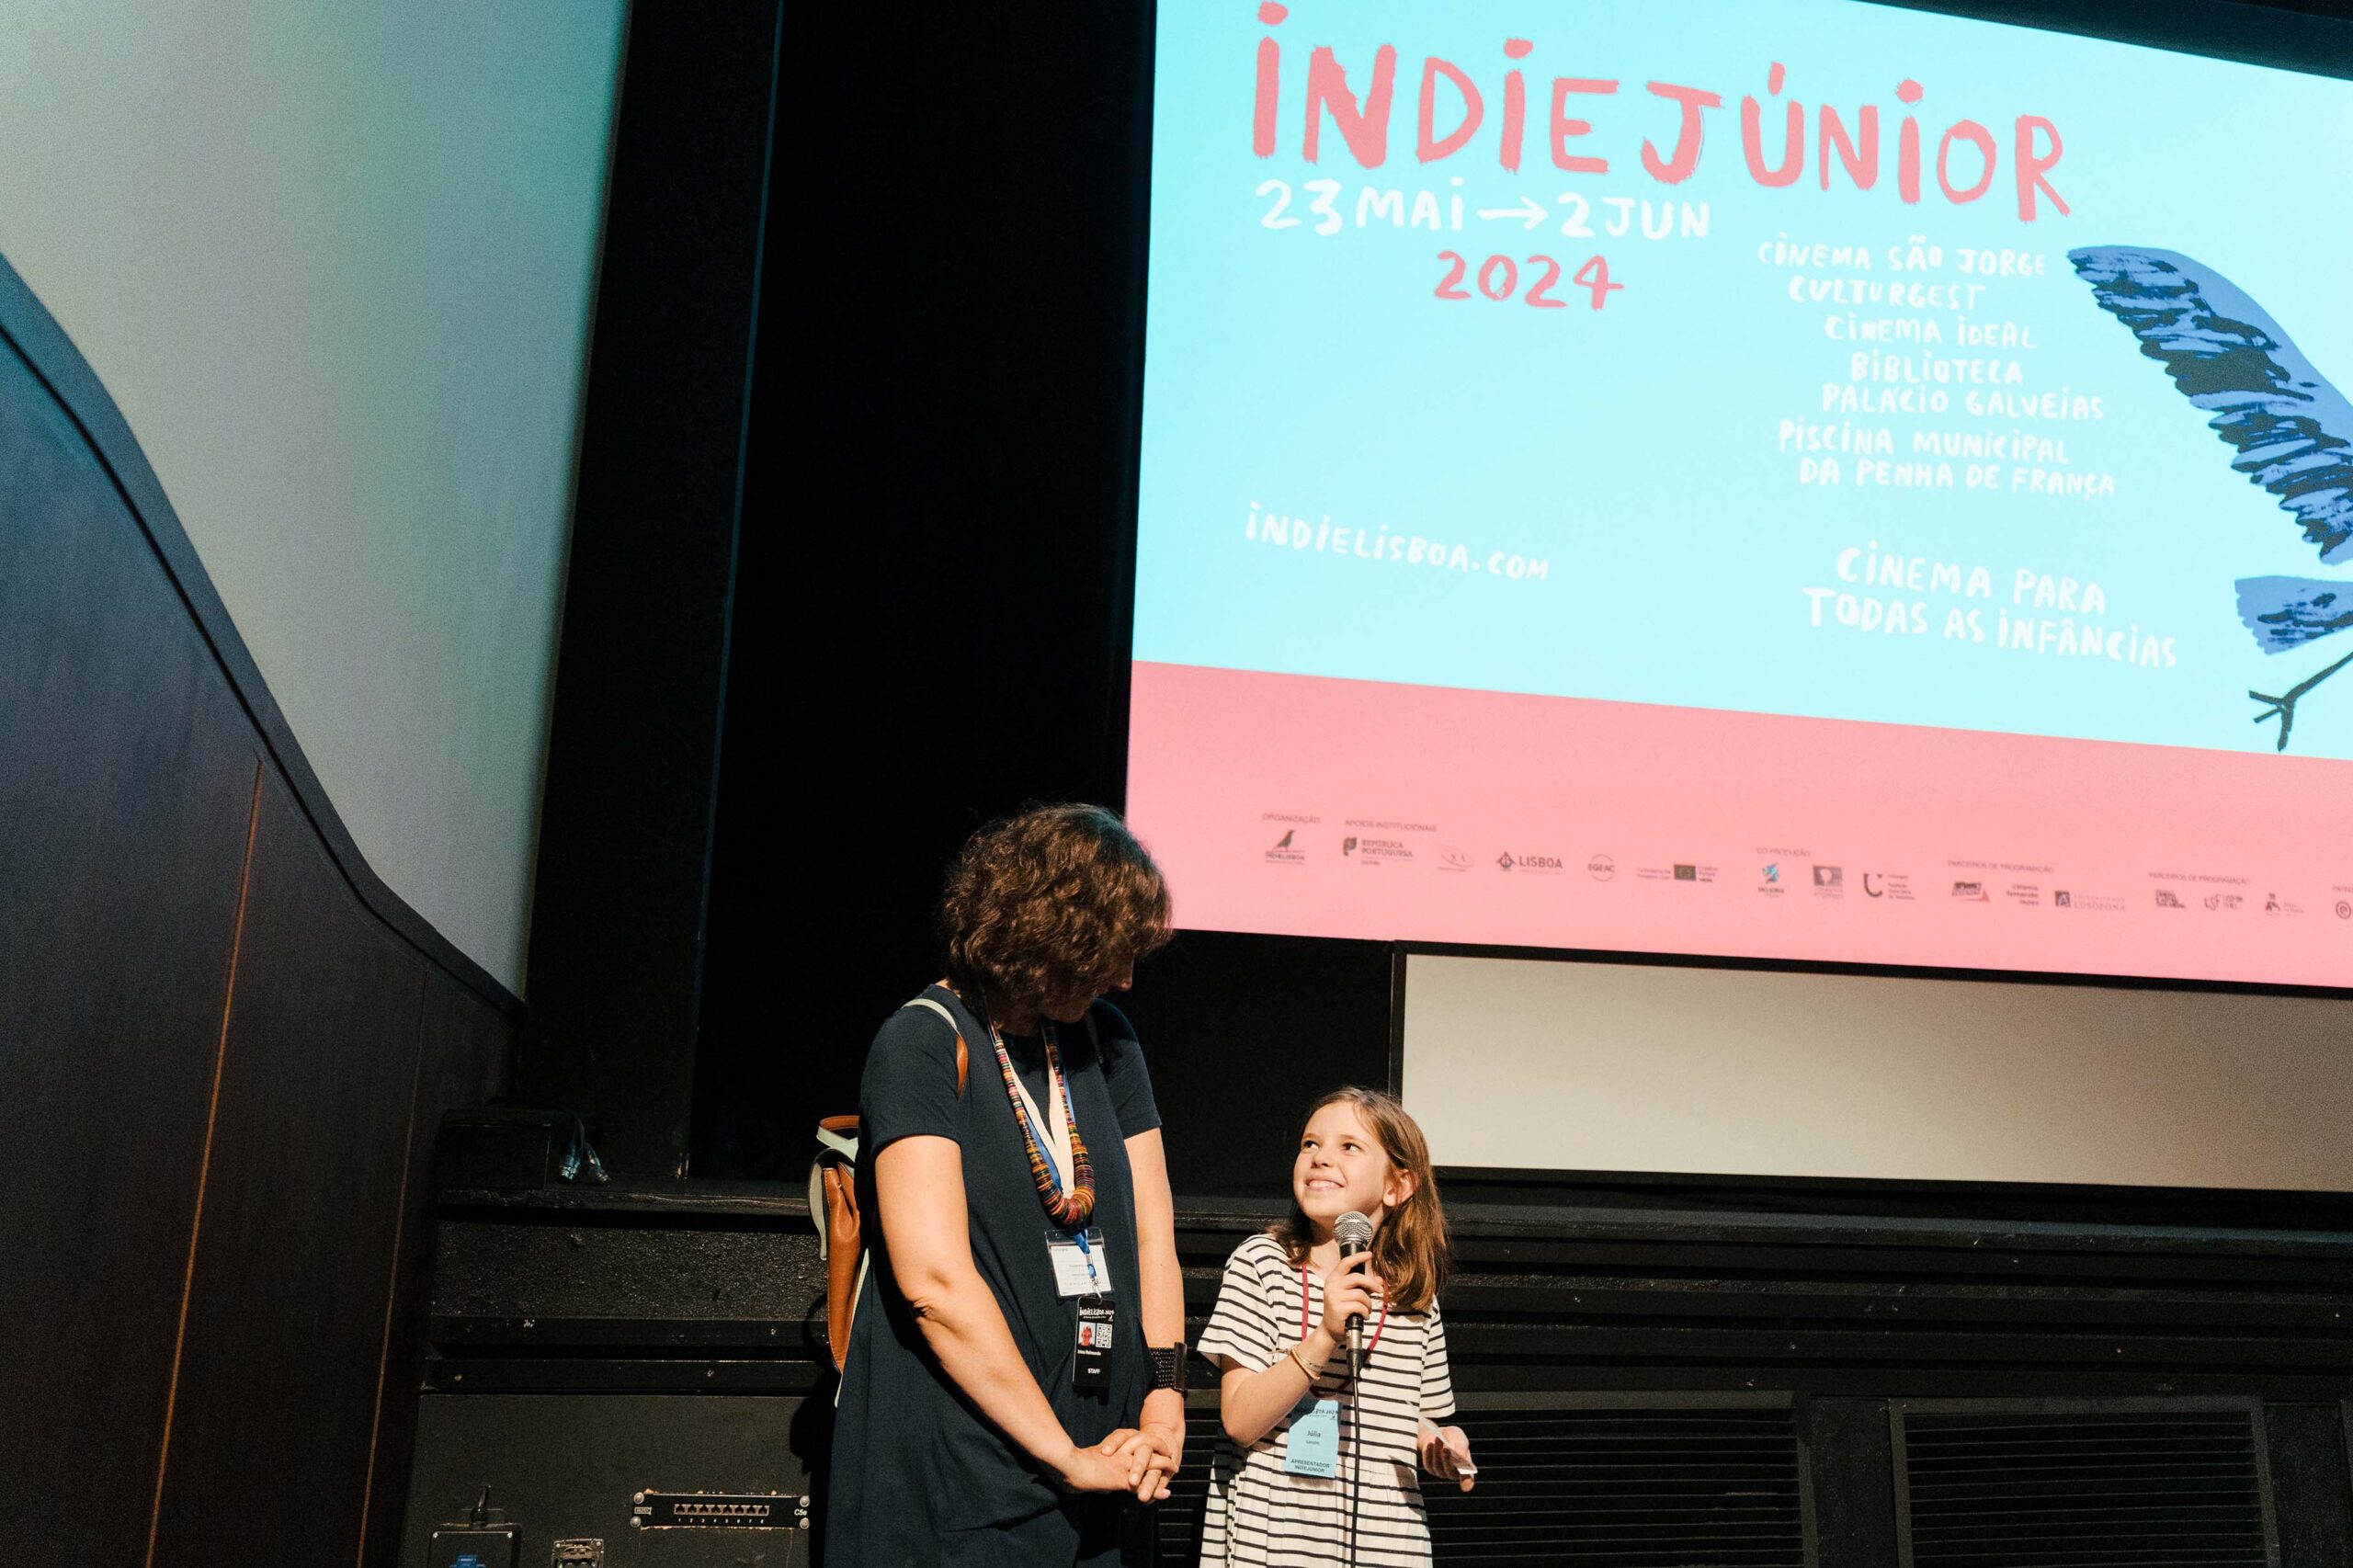 IndieLisboa See you next year! IndieJunior says goodbye, but not without saying goodbye to you.